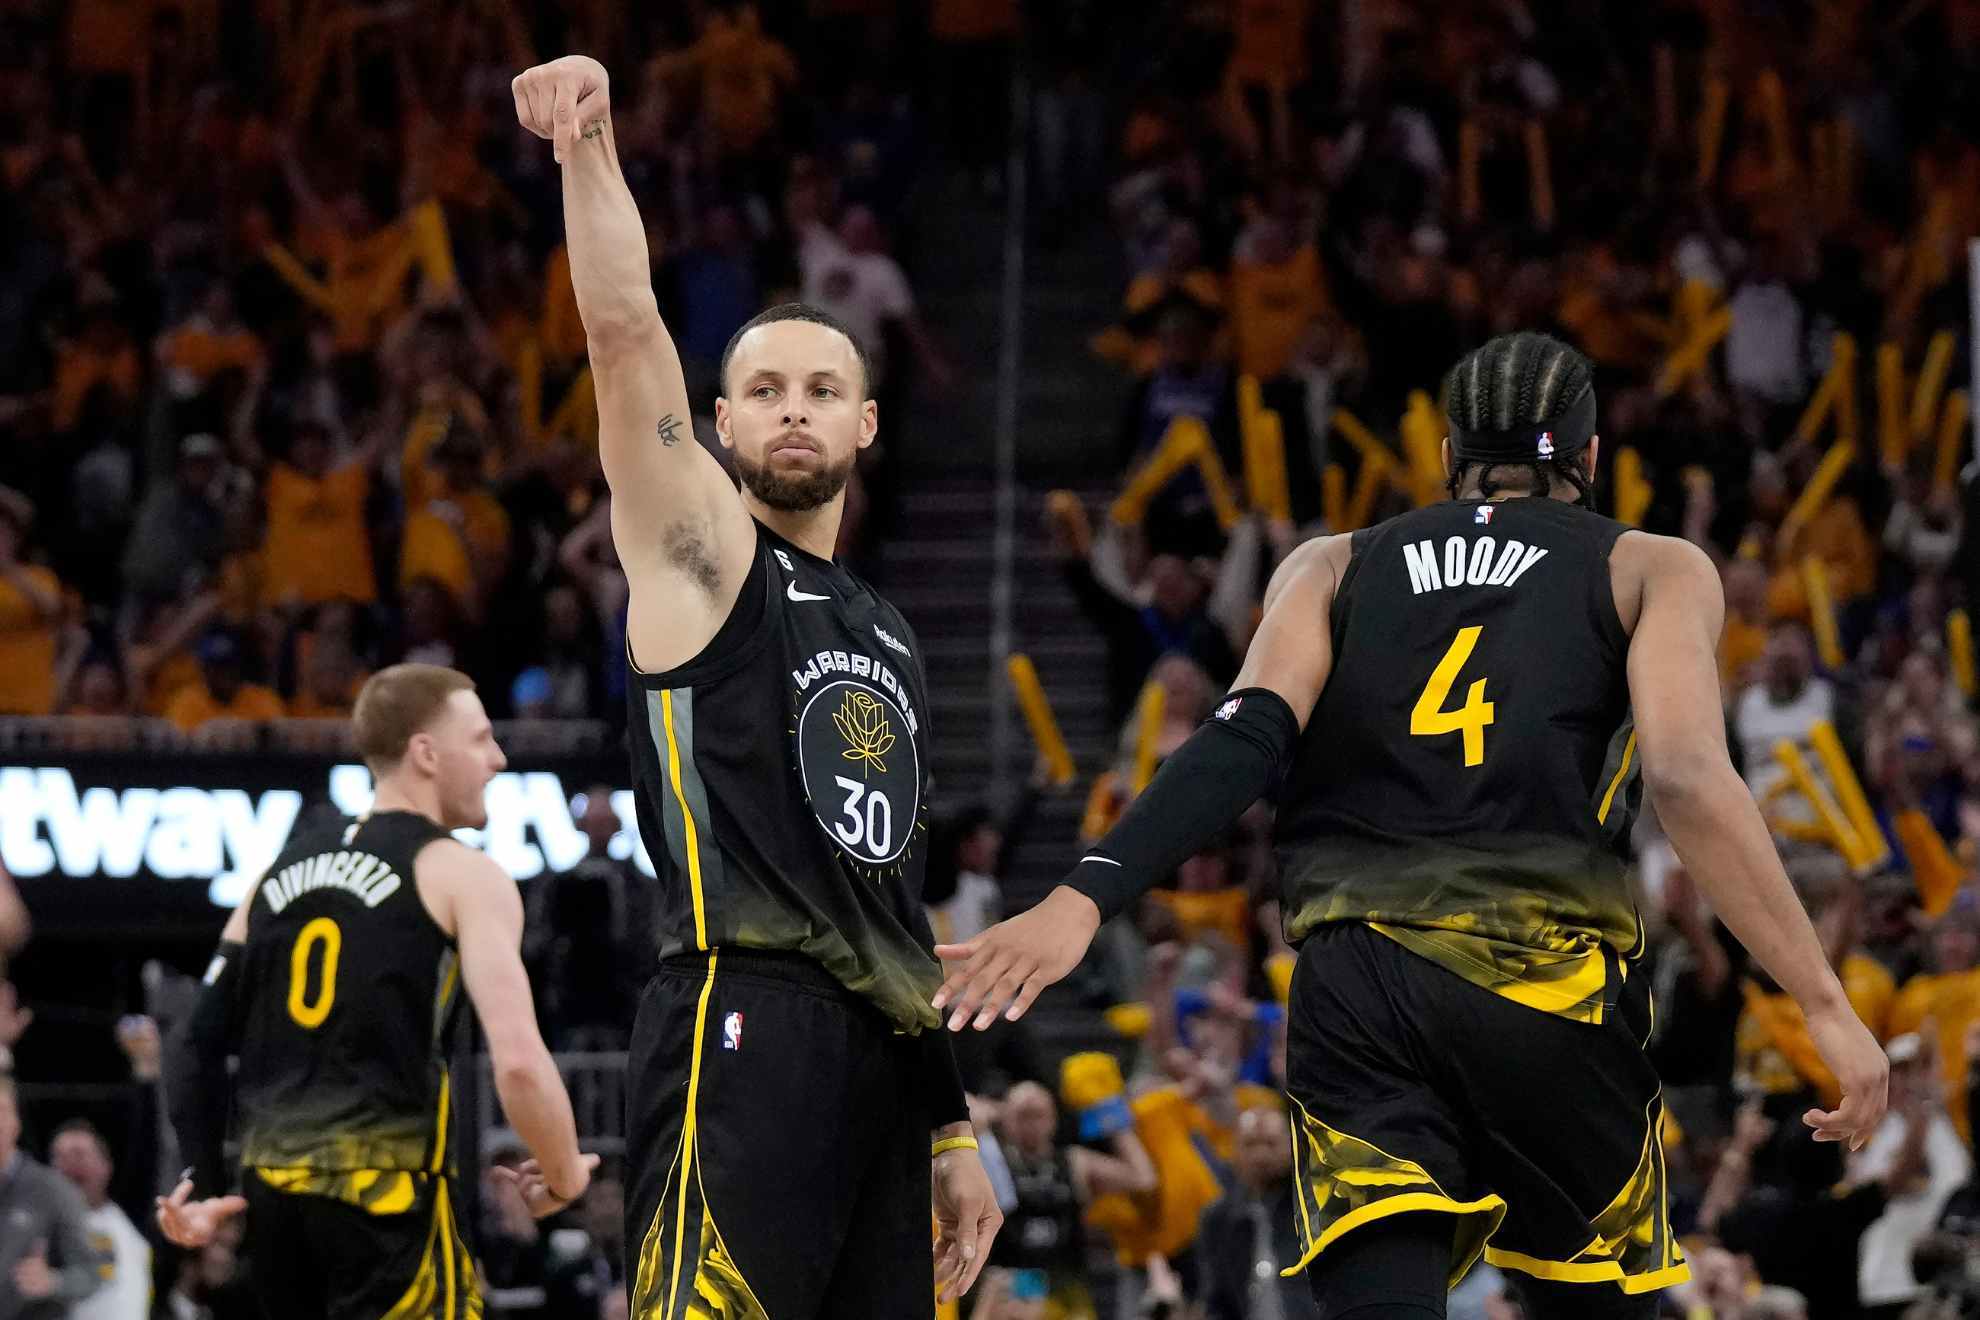 Steph Curry dropped 36 against the Kings in the Warriors' Game 3 win.